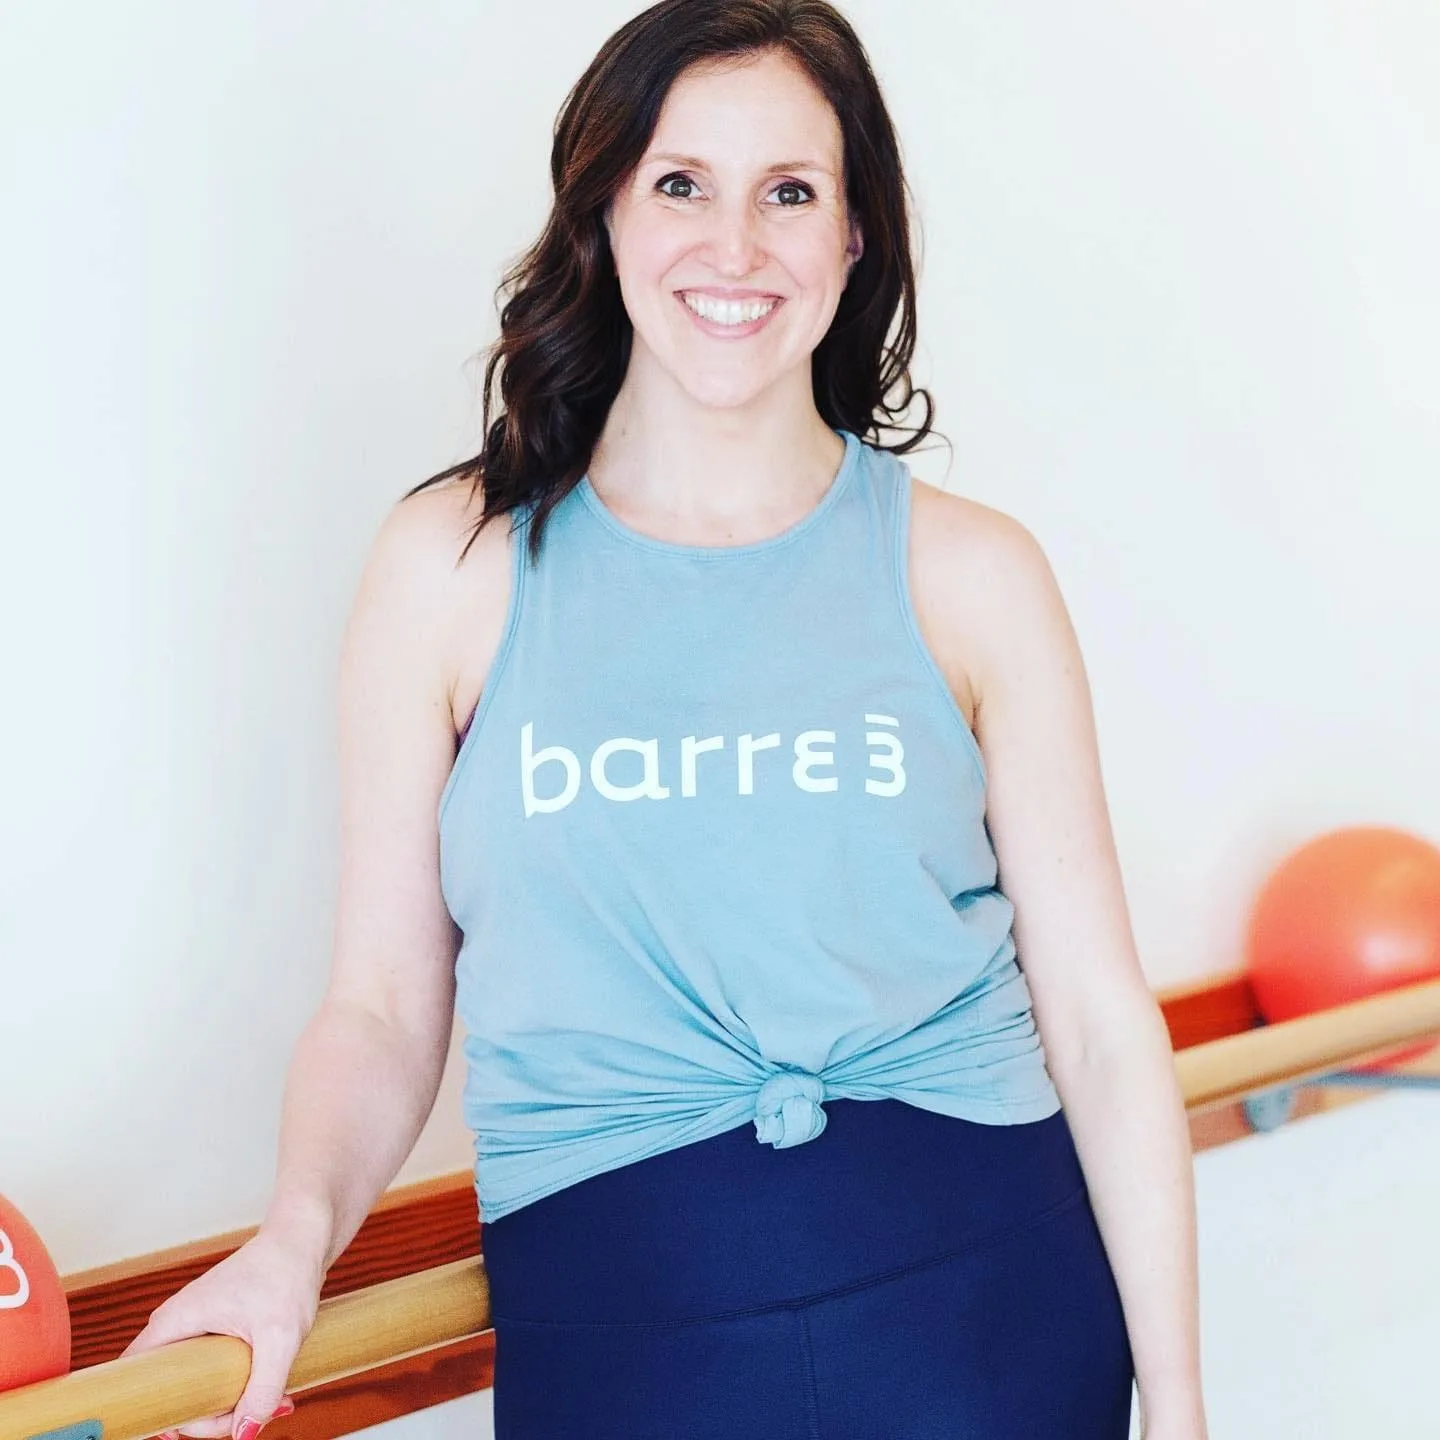 Suzy of Barre 3